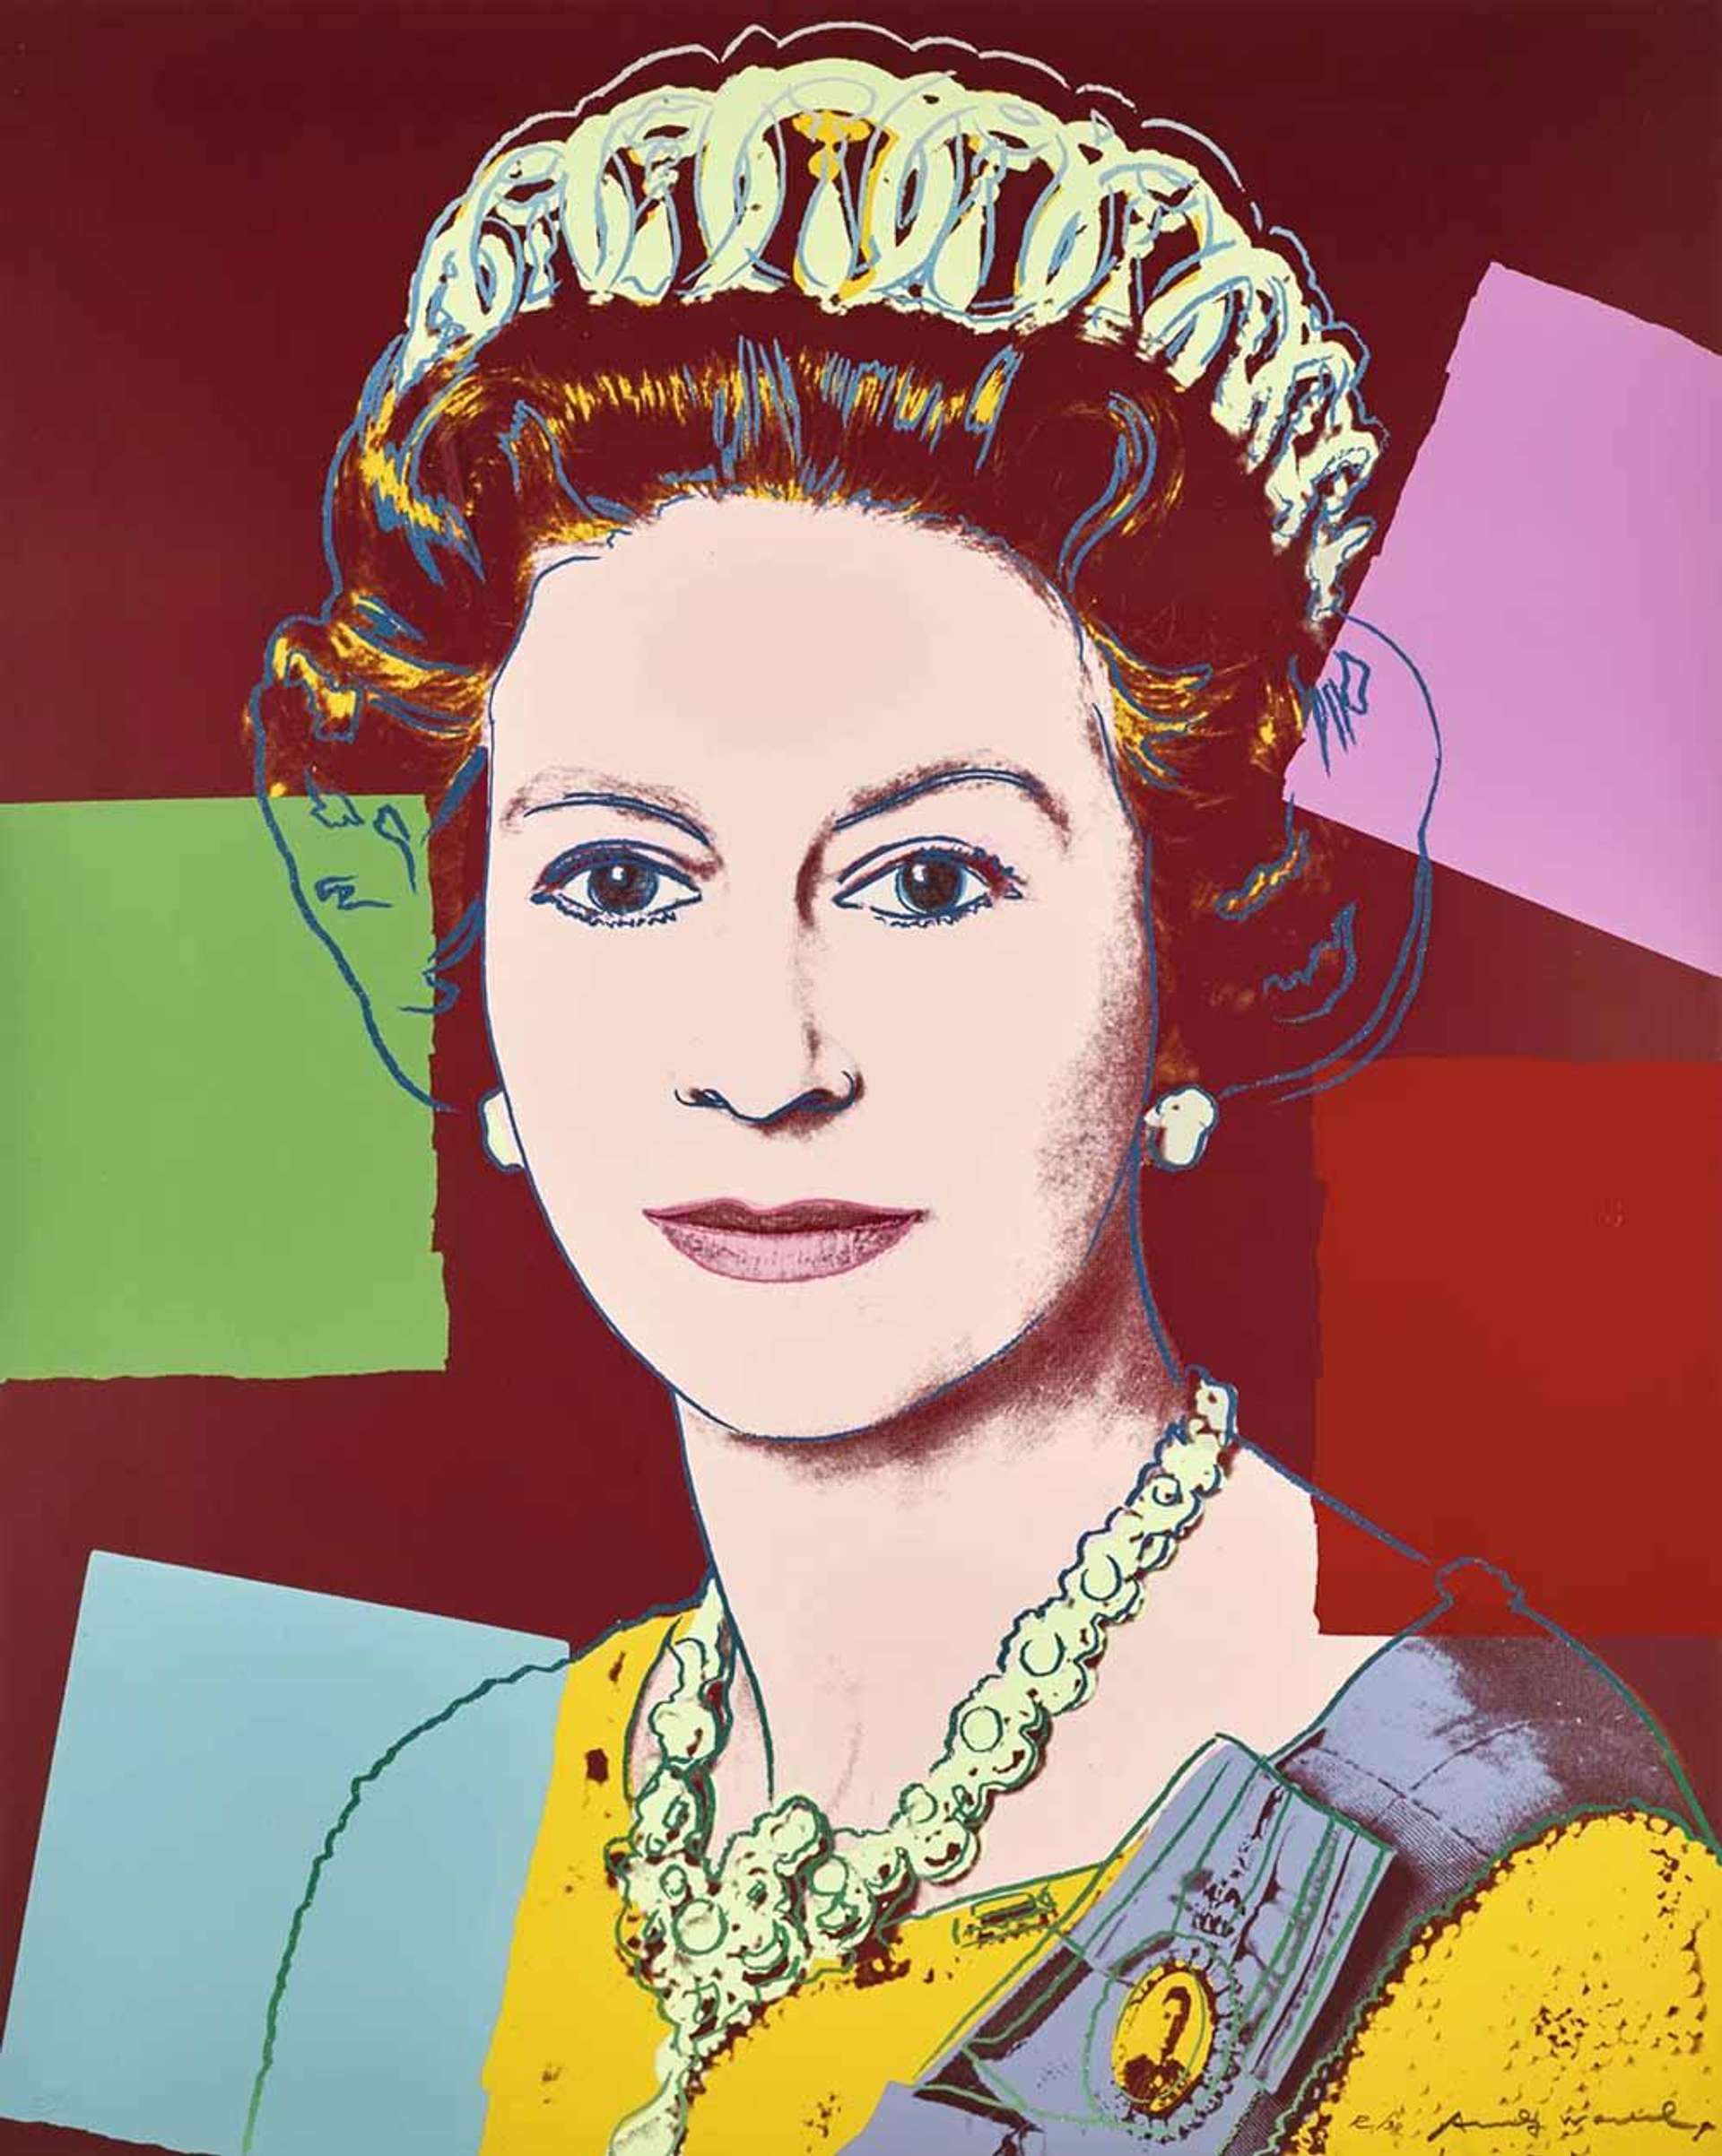 A screenprint by Andy Warhol depicting the royal portrait of Queen Elizabeth II against a burgundy background with collaged blocks of green, pink, red, powder blue, and yellow.